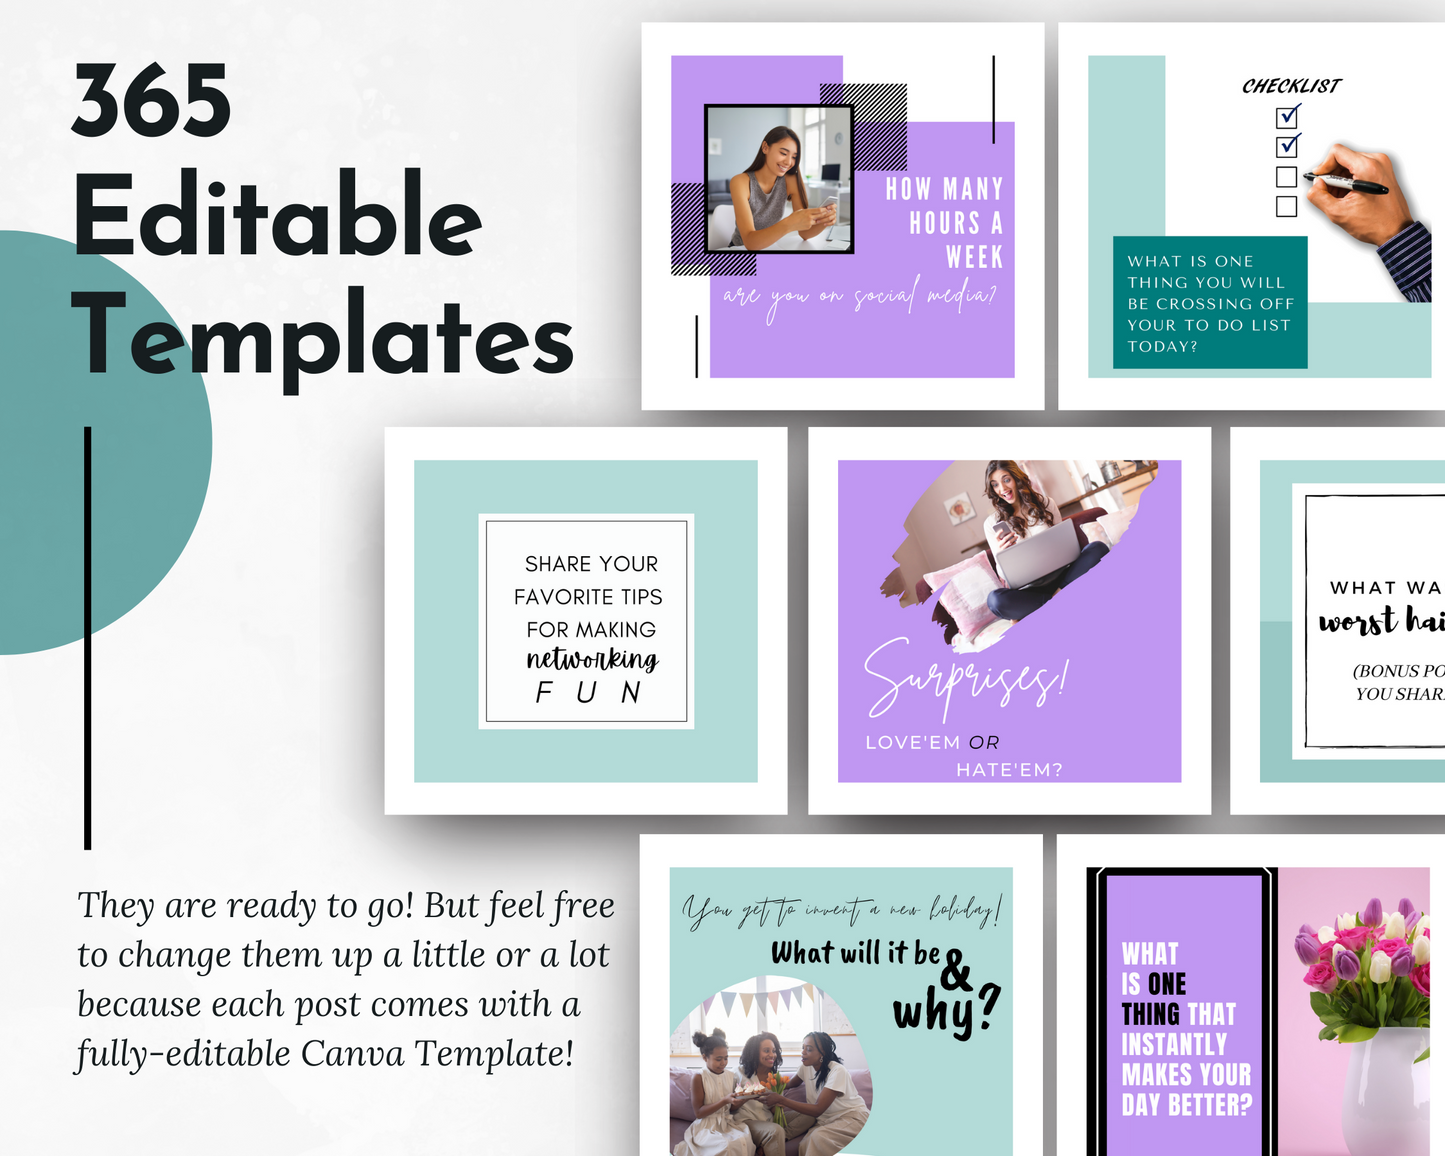 Engaging Questions for Social Media Post Bundle with Canva Templates